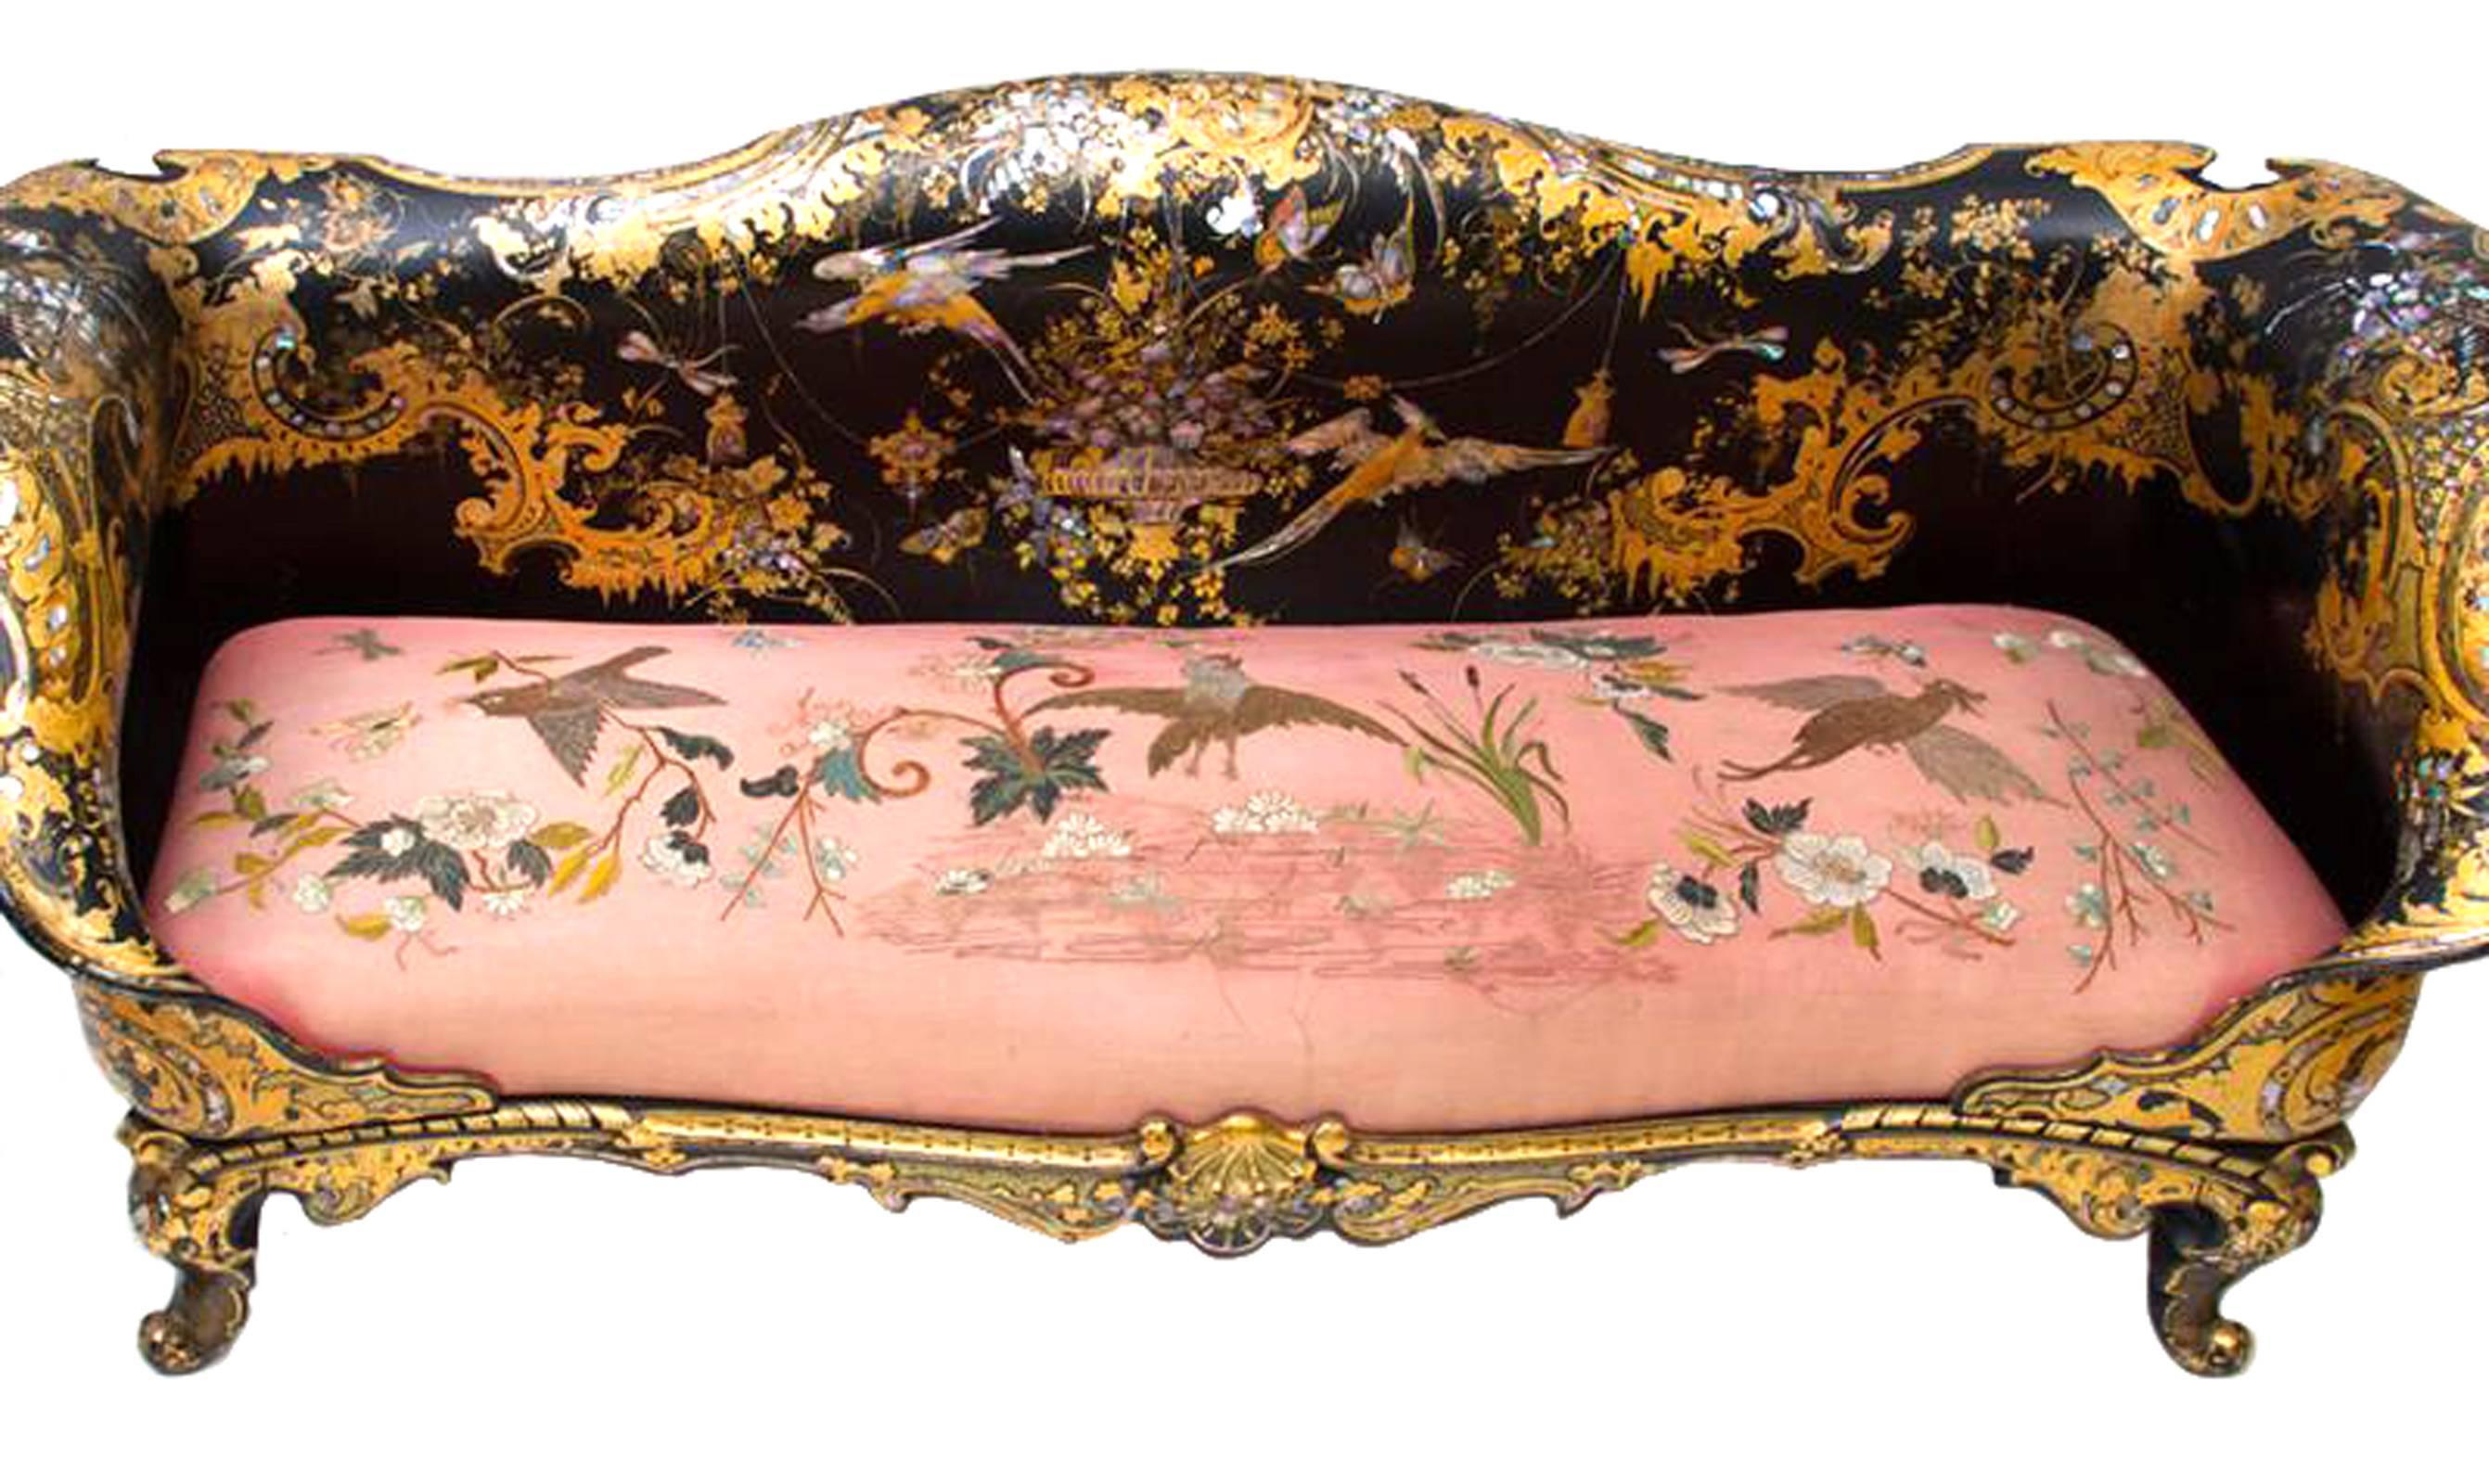 A mother-of-pearl and parcel-gilt inlaid papier mâché "japanned"settee decorated with floral sprays, urns and birds, surrounded by scrolling borders highlighted in gilt, on a conformingly decorated sea trail, with padded seat embroidered